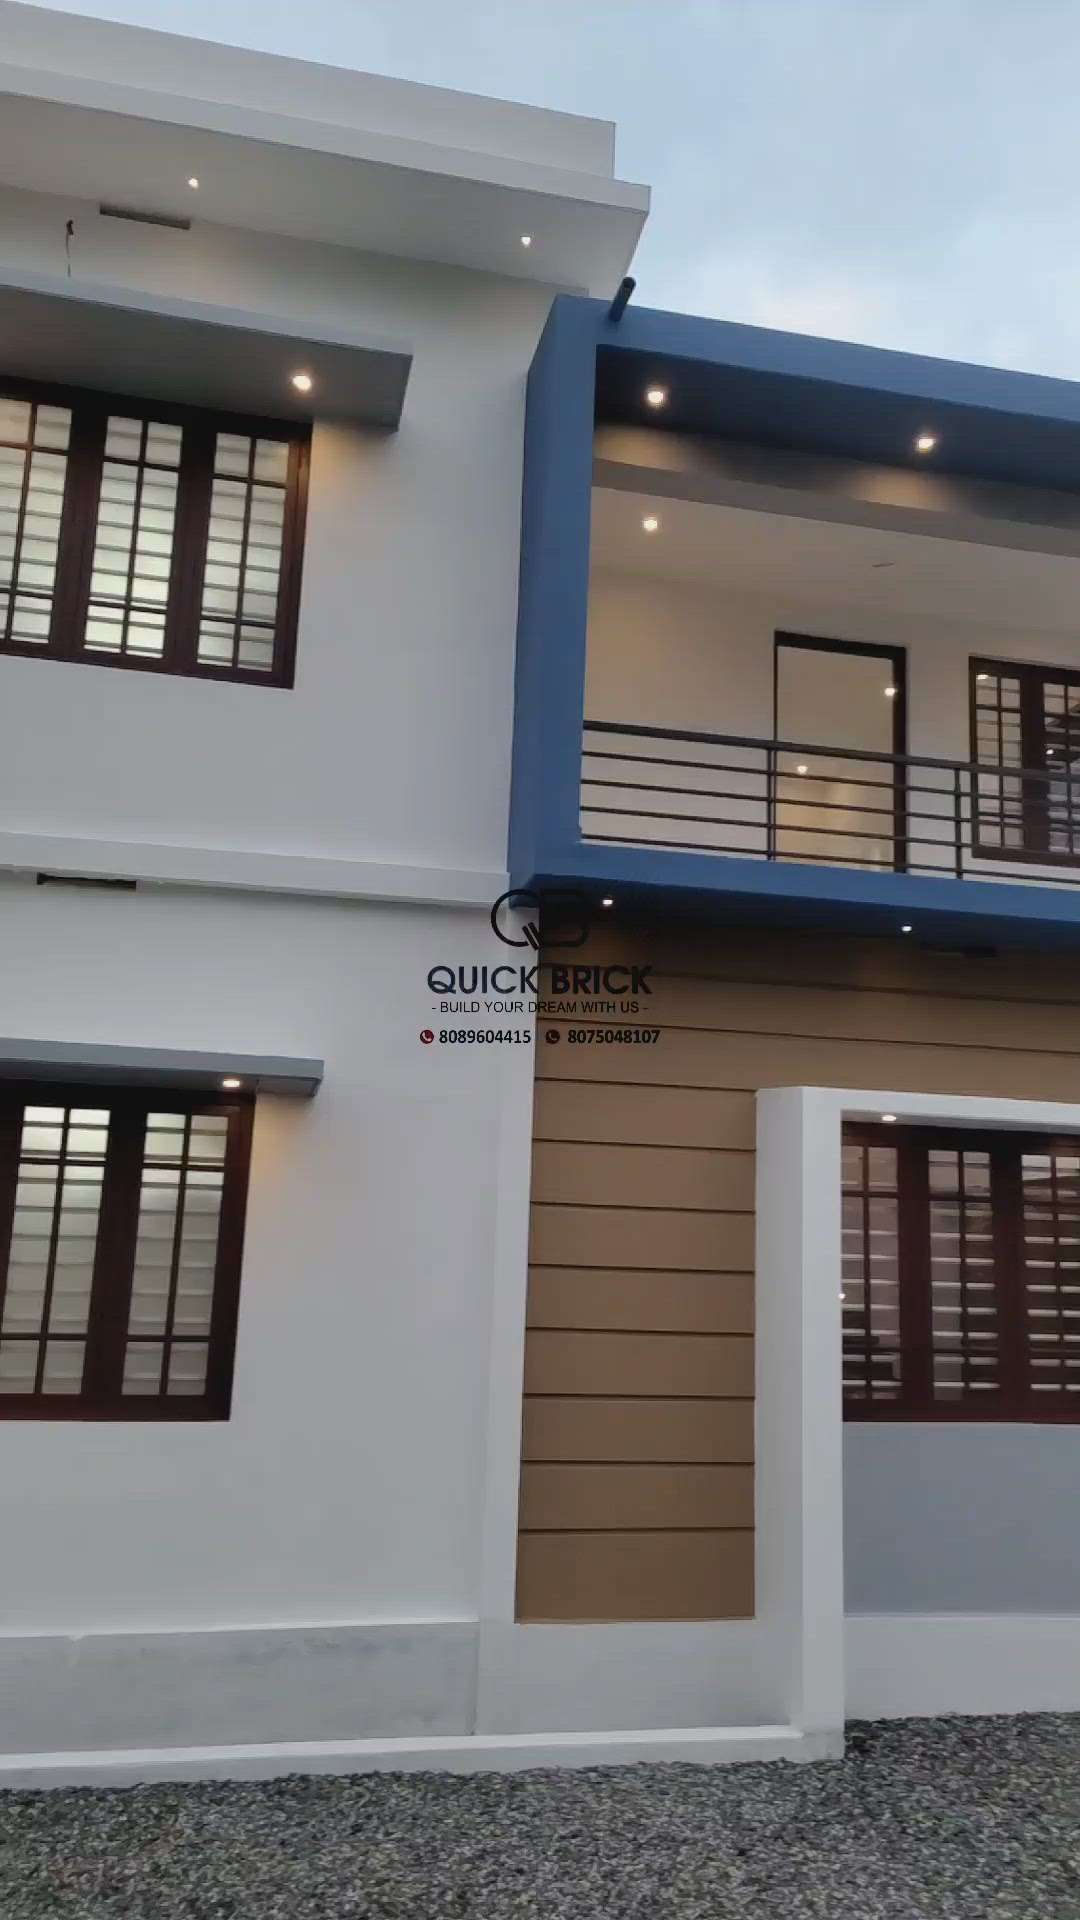 Completed 1650 sqfeet 4 bhk Home at karipode, palakkad

Quickbrick engineers planners builders and developers
Contact 8075048107
qbbuilders11@gmail.com

#quickbrick #quickbrickengineers#qbbuilders 
.
.
.
.
.
#keralahomes #kerala #architecture #keralahomedesign #interiordesign #homedecor  #homesweethome #interior #keralaarchitecture #interiordesigner #homedesign #keralahomeplanners #homedesignideas #homedecoration #keralainteriordesign #homes #archdaily #ddesign #architect #traditional #keralahome #freekeralahomeplans #homeplans #keralahouse  #ddesigner #ddrawing #bhfyless